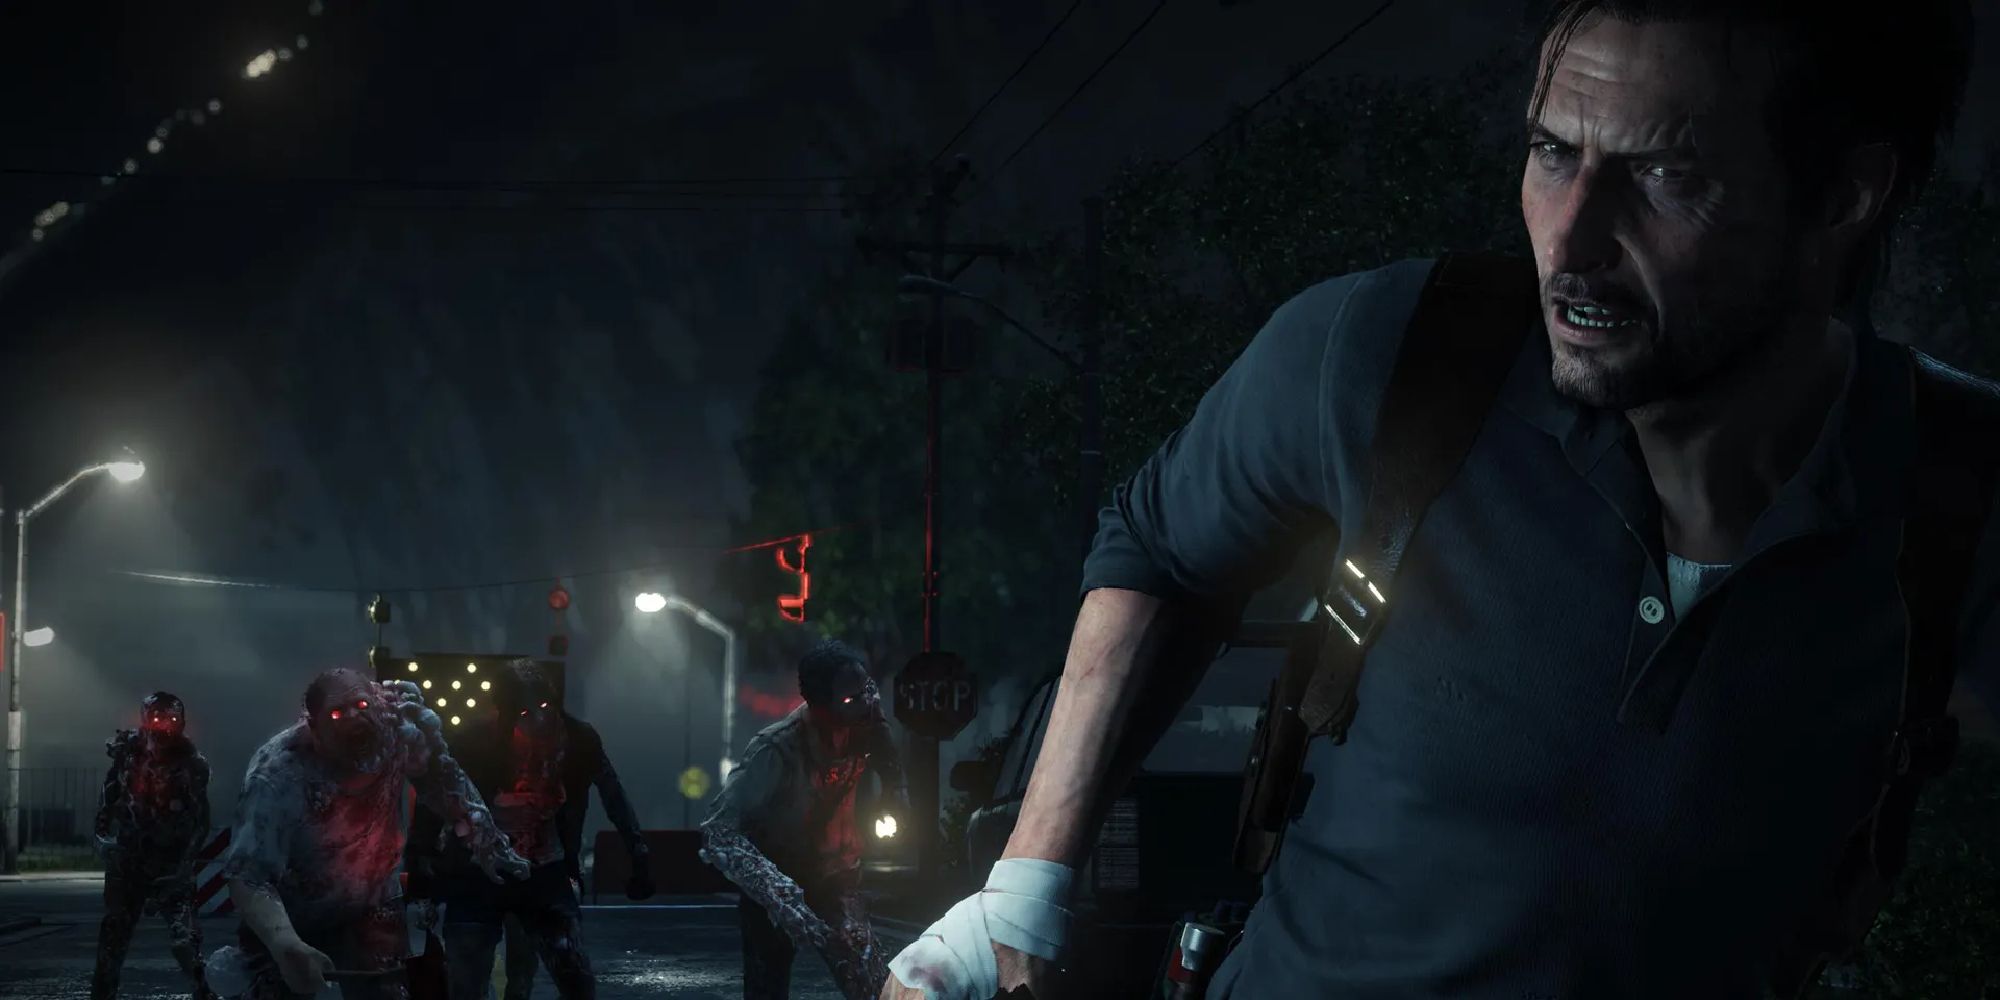 The main character of the series, Sebastian, is running away from a crowd of enemies.